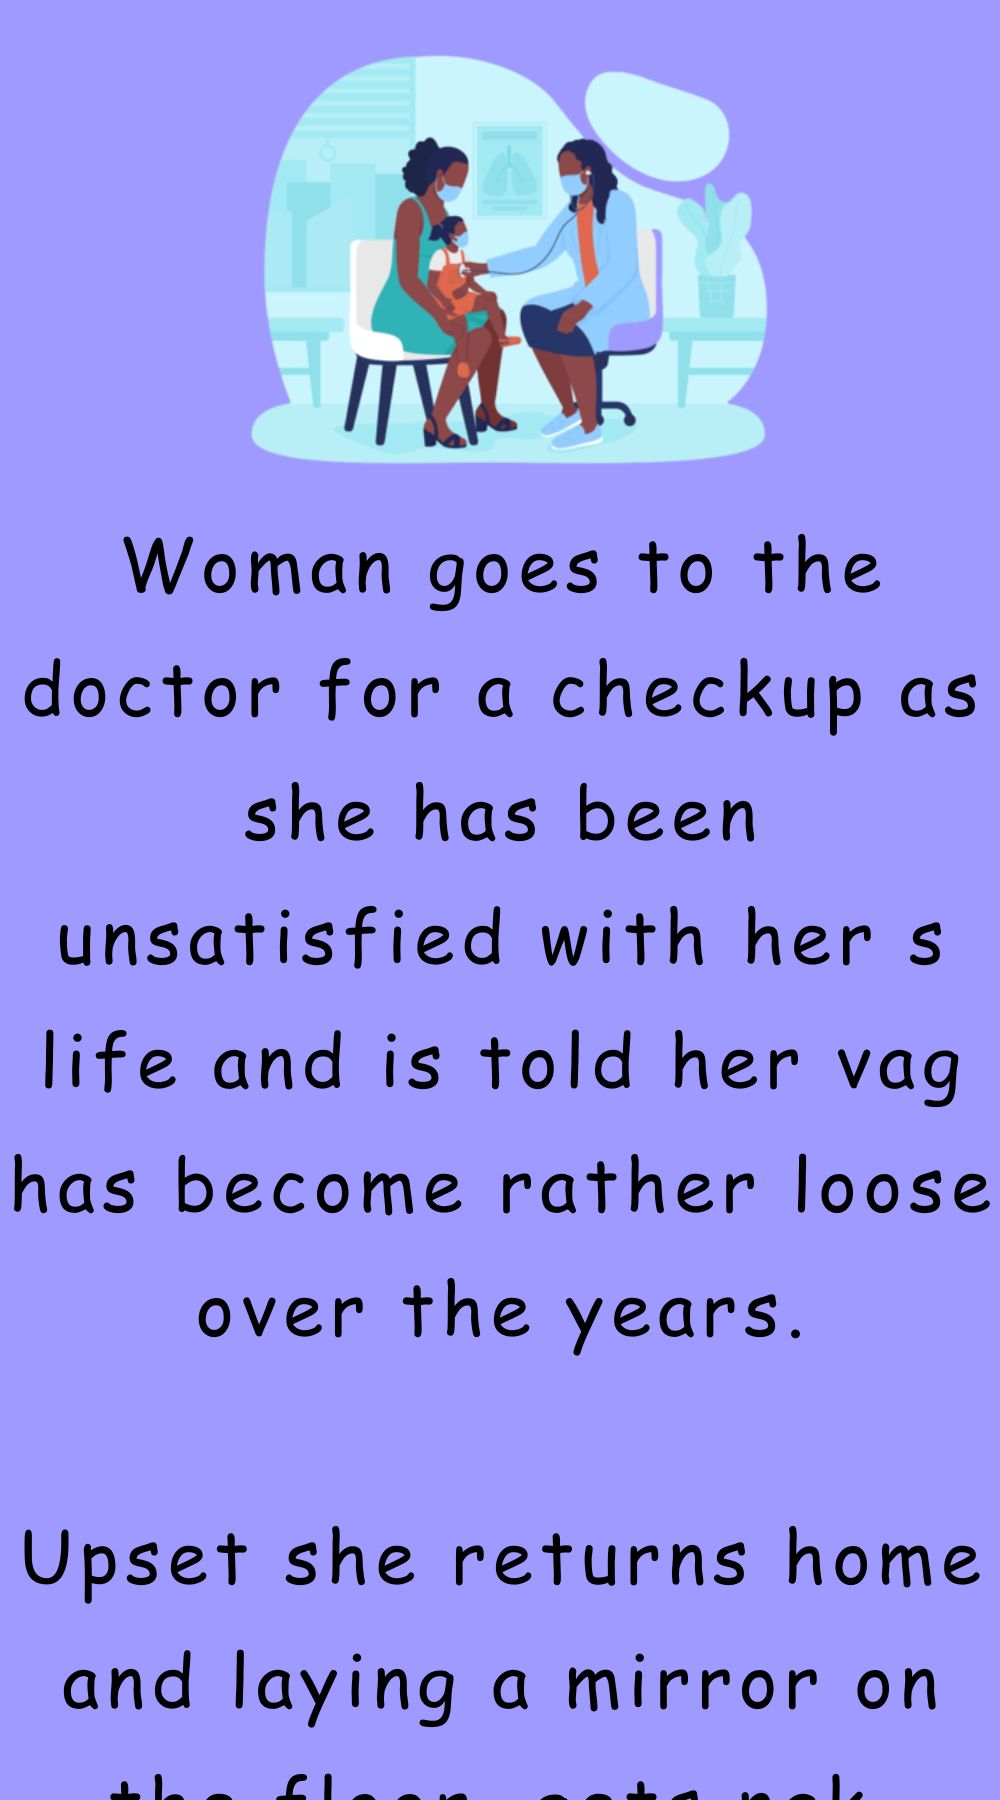 Woman goes to the doctor for a checkup